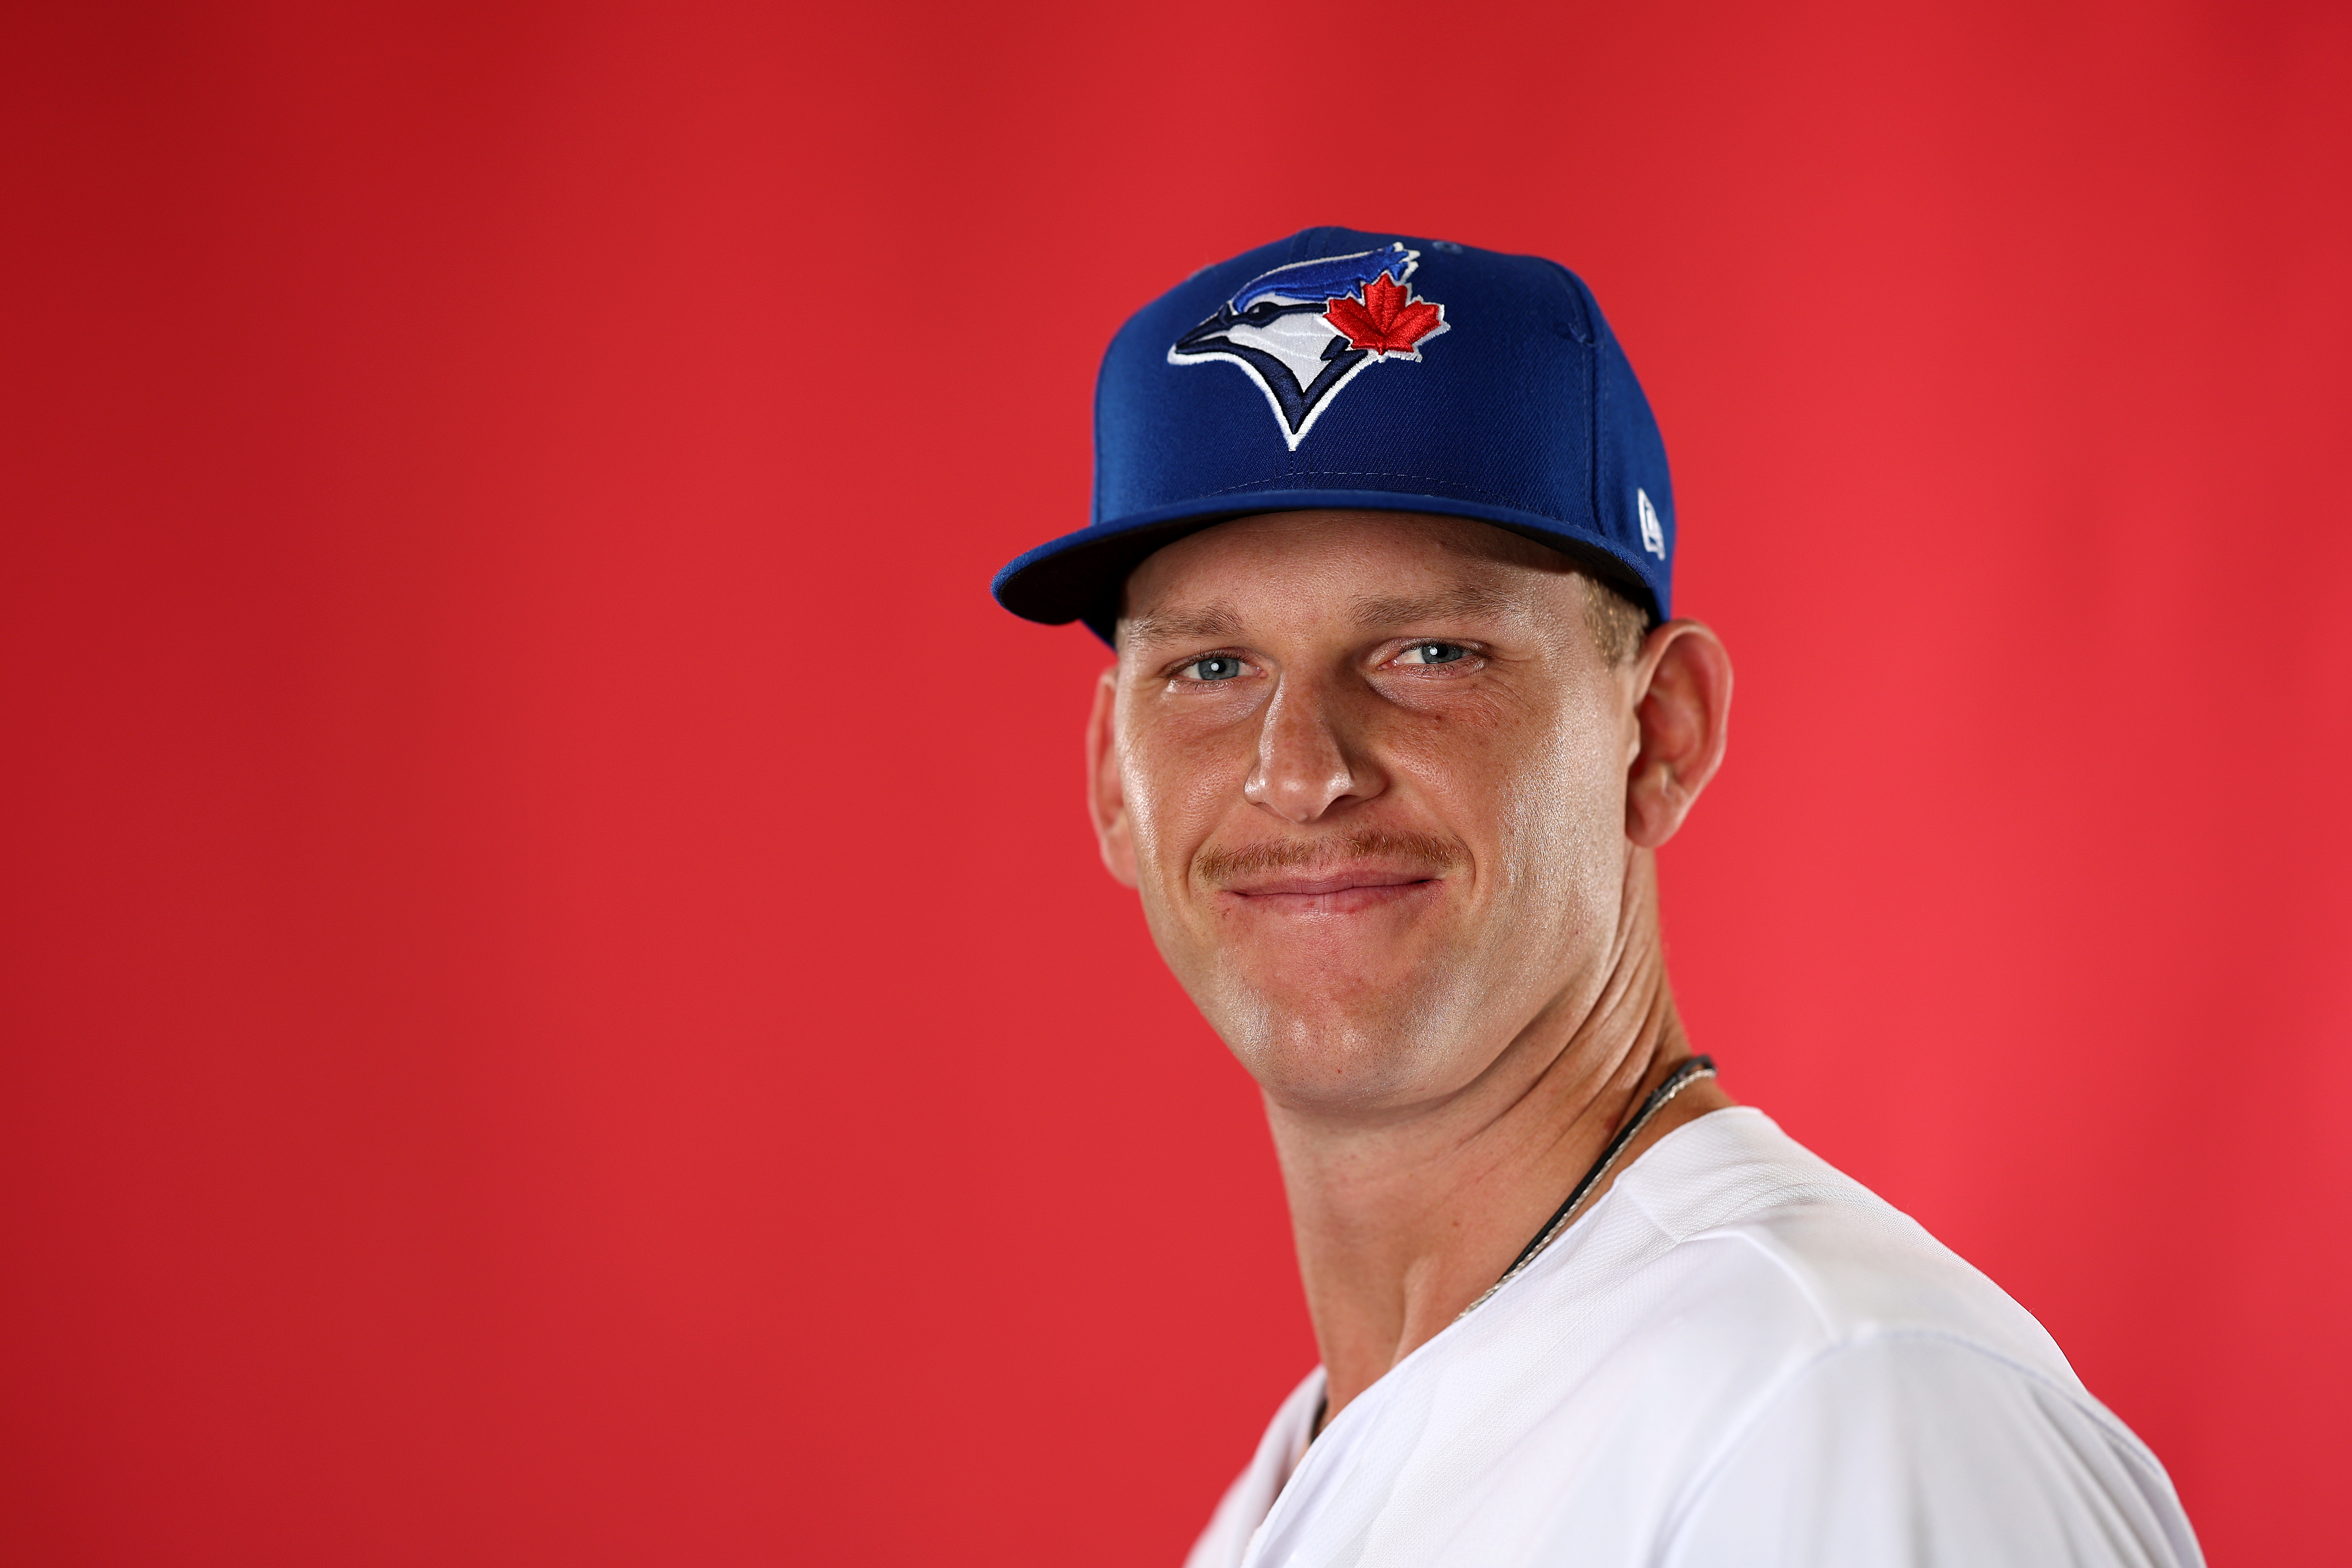 Bowden Francis #73 of the Toronto Blue Jays poses for a portrait during Toronto Blue Jays Photo Day at the Toronto Blue Jays Spring Training facility on February 22, 2023 in Dunedin, Florida.